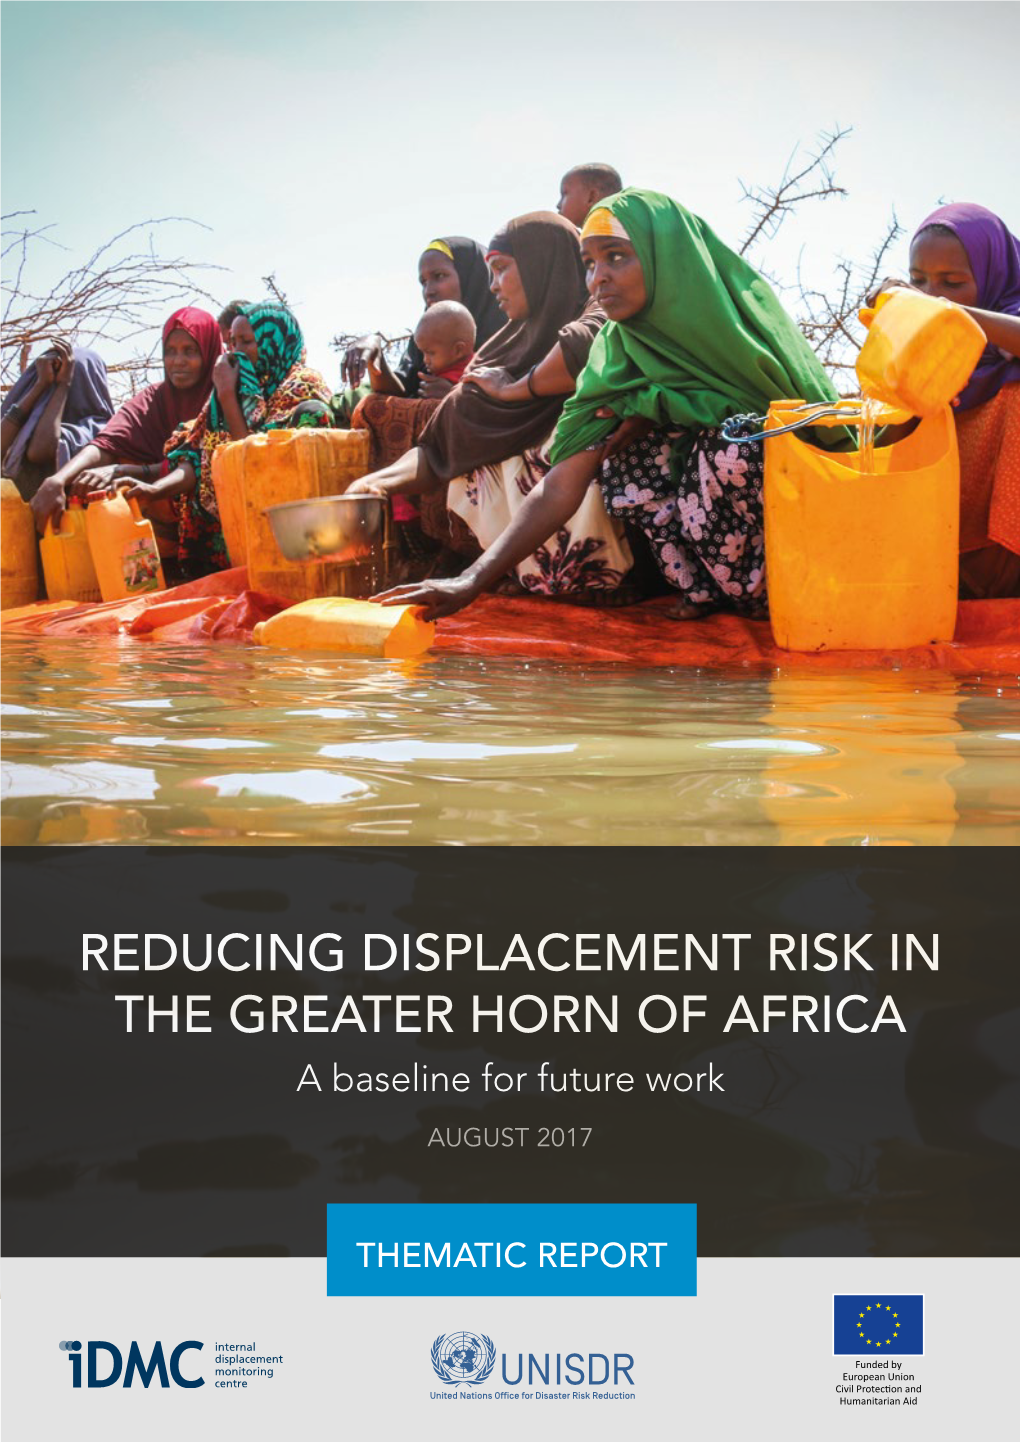 Reducing Displacement Risk in the Greater Horn of Africa a Baseline for Future Work